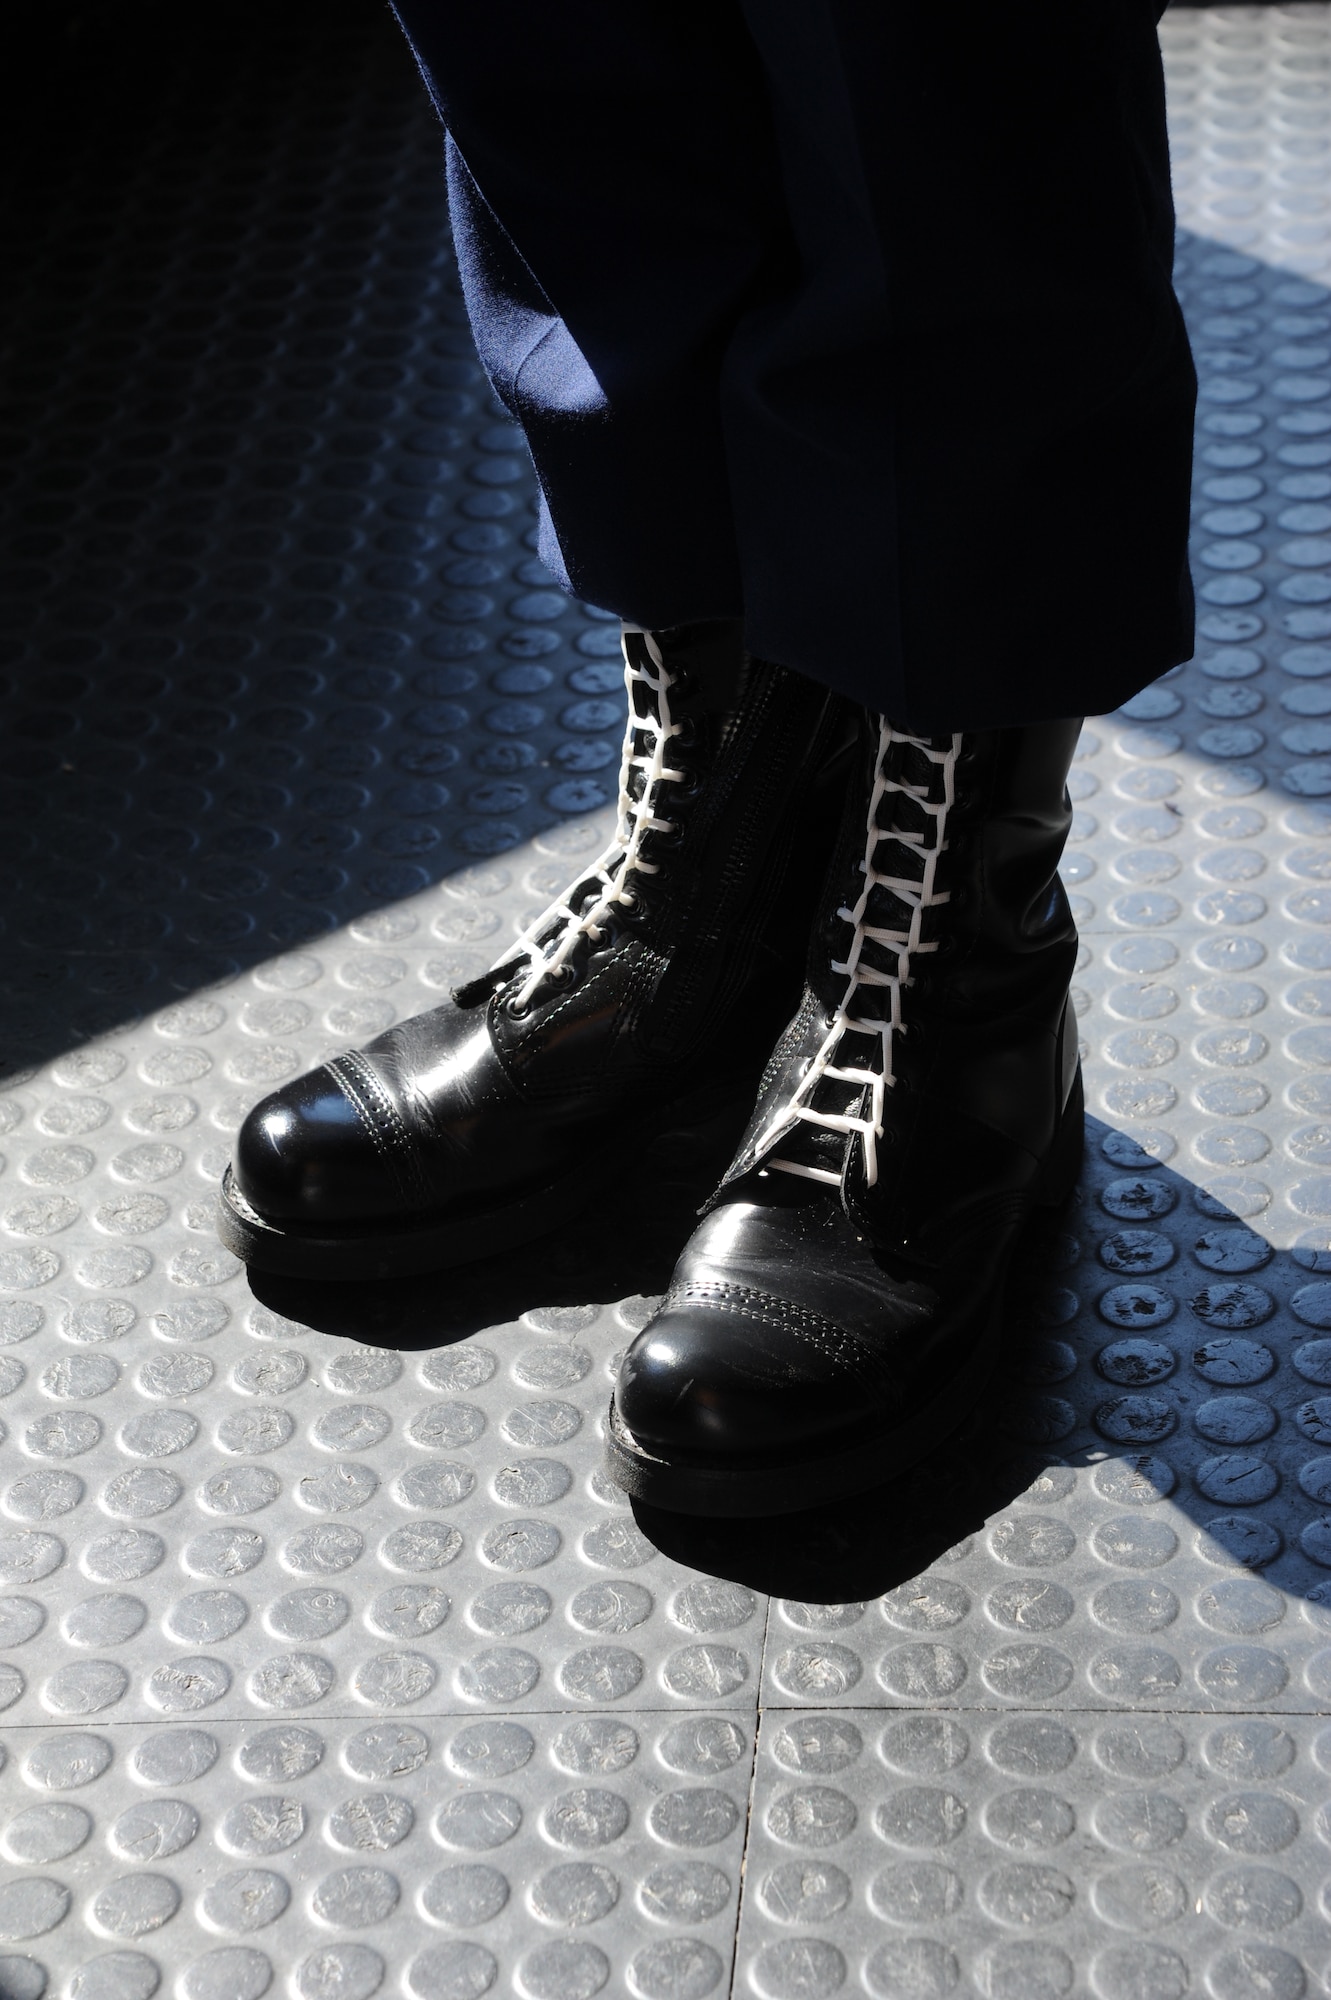 The 81st Security Forces Squadron elite gate guards wear black boots with white shoe strings as a part of their elite uniforms at Keesler Air Force Base, Miss. Keesler is the only base in Air Education and Training Command to adopt an elite gate guard program. The program increases pride and discipline within the 81st SFS while creating a positive, lasting impression in the local community. (U.S. Air Force photo by Kemberly Groue)